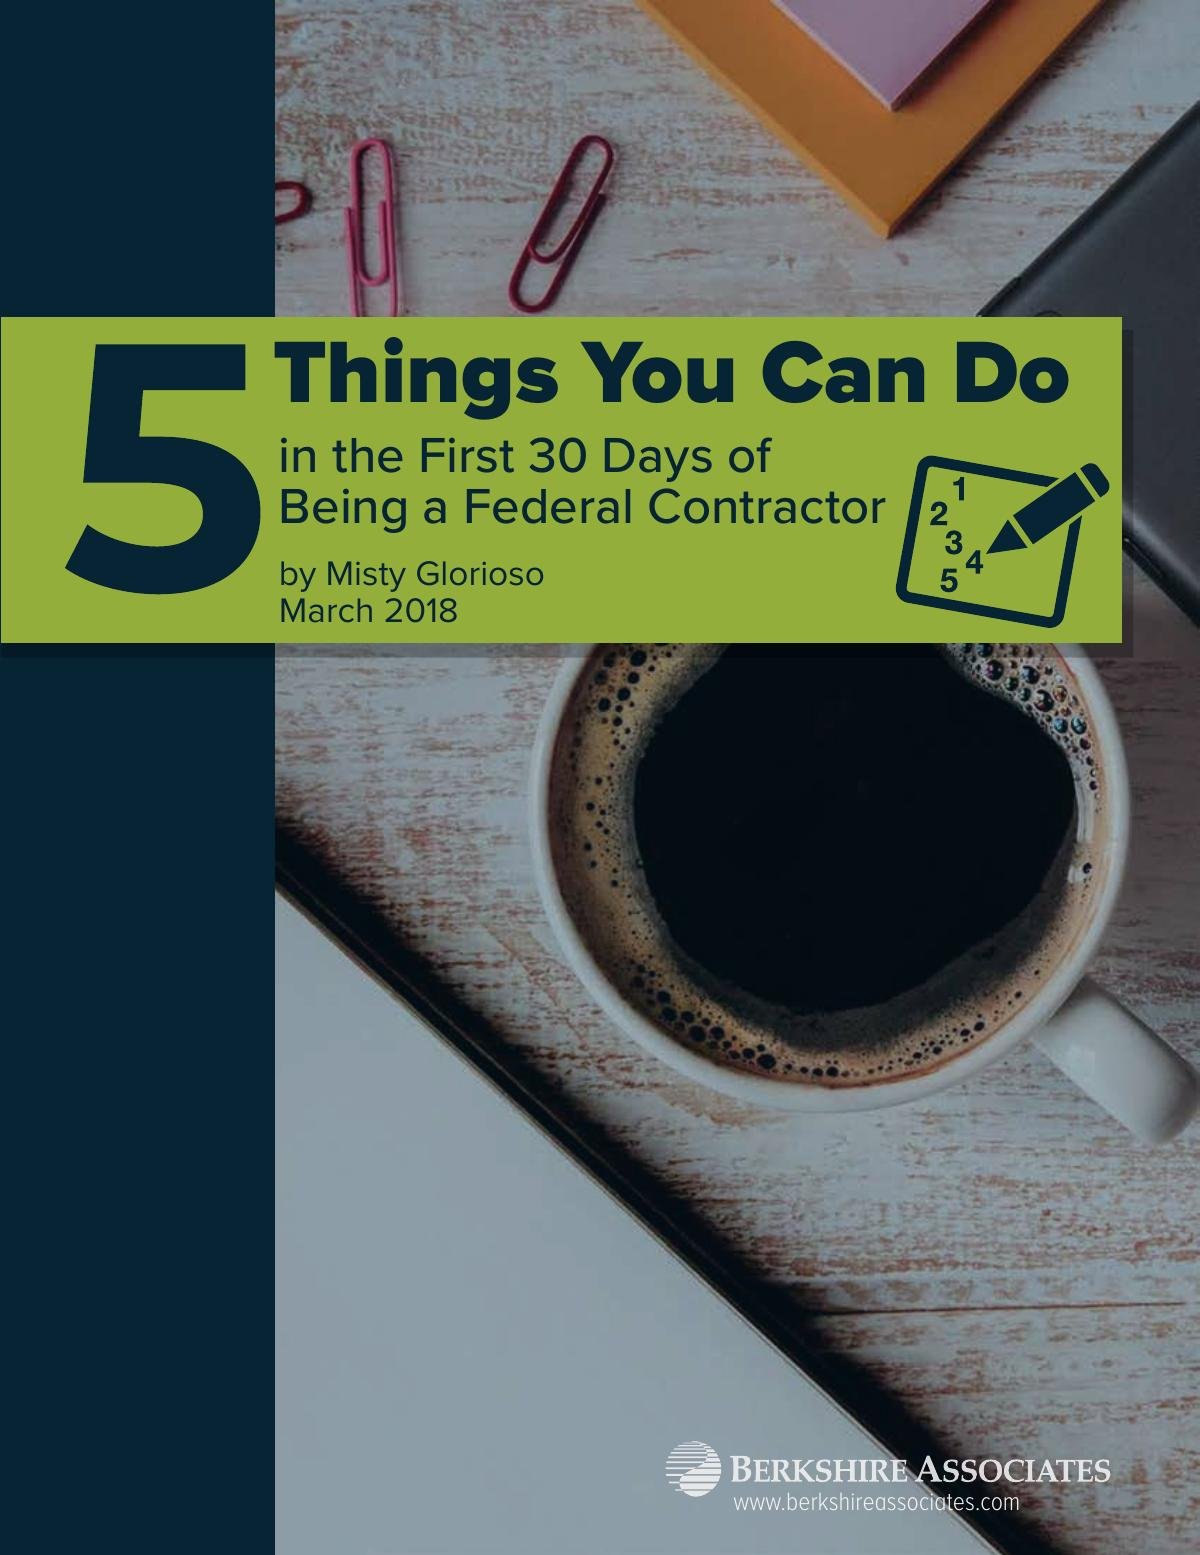 Five Things You Can Do in the First 30 Days of Being Federal Contractor 